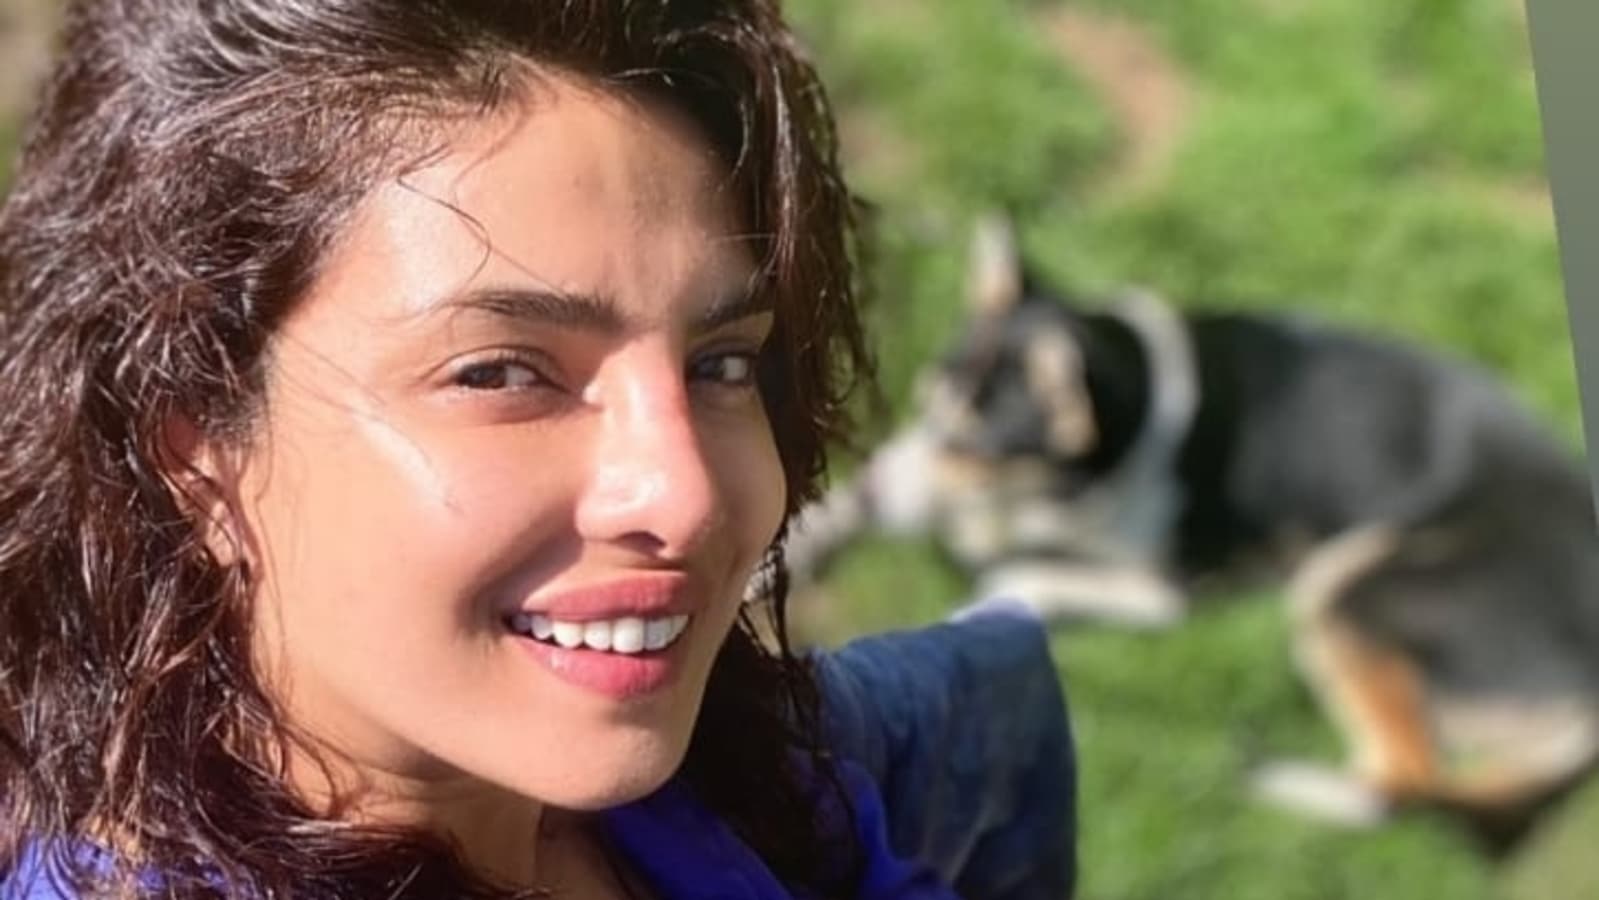 Priyanka Chopra Flaunts A No Makeup Look In Sunny Pic With Her Pup As She Returns To London 